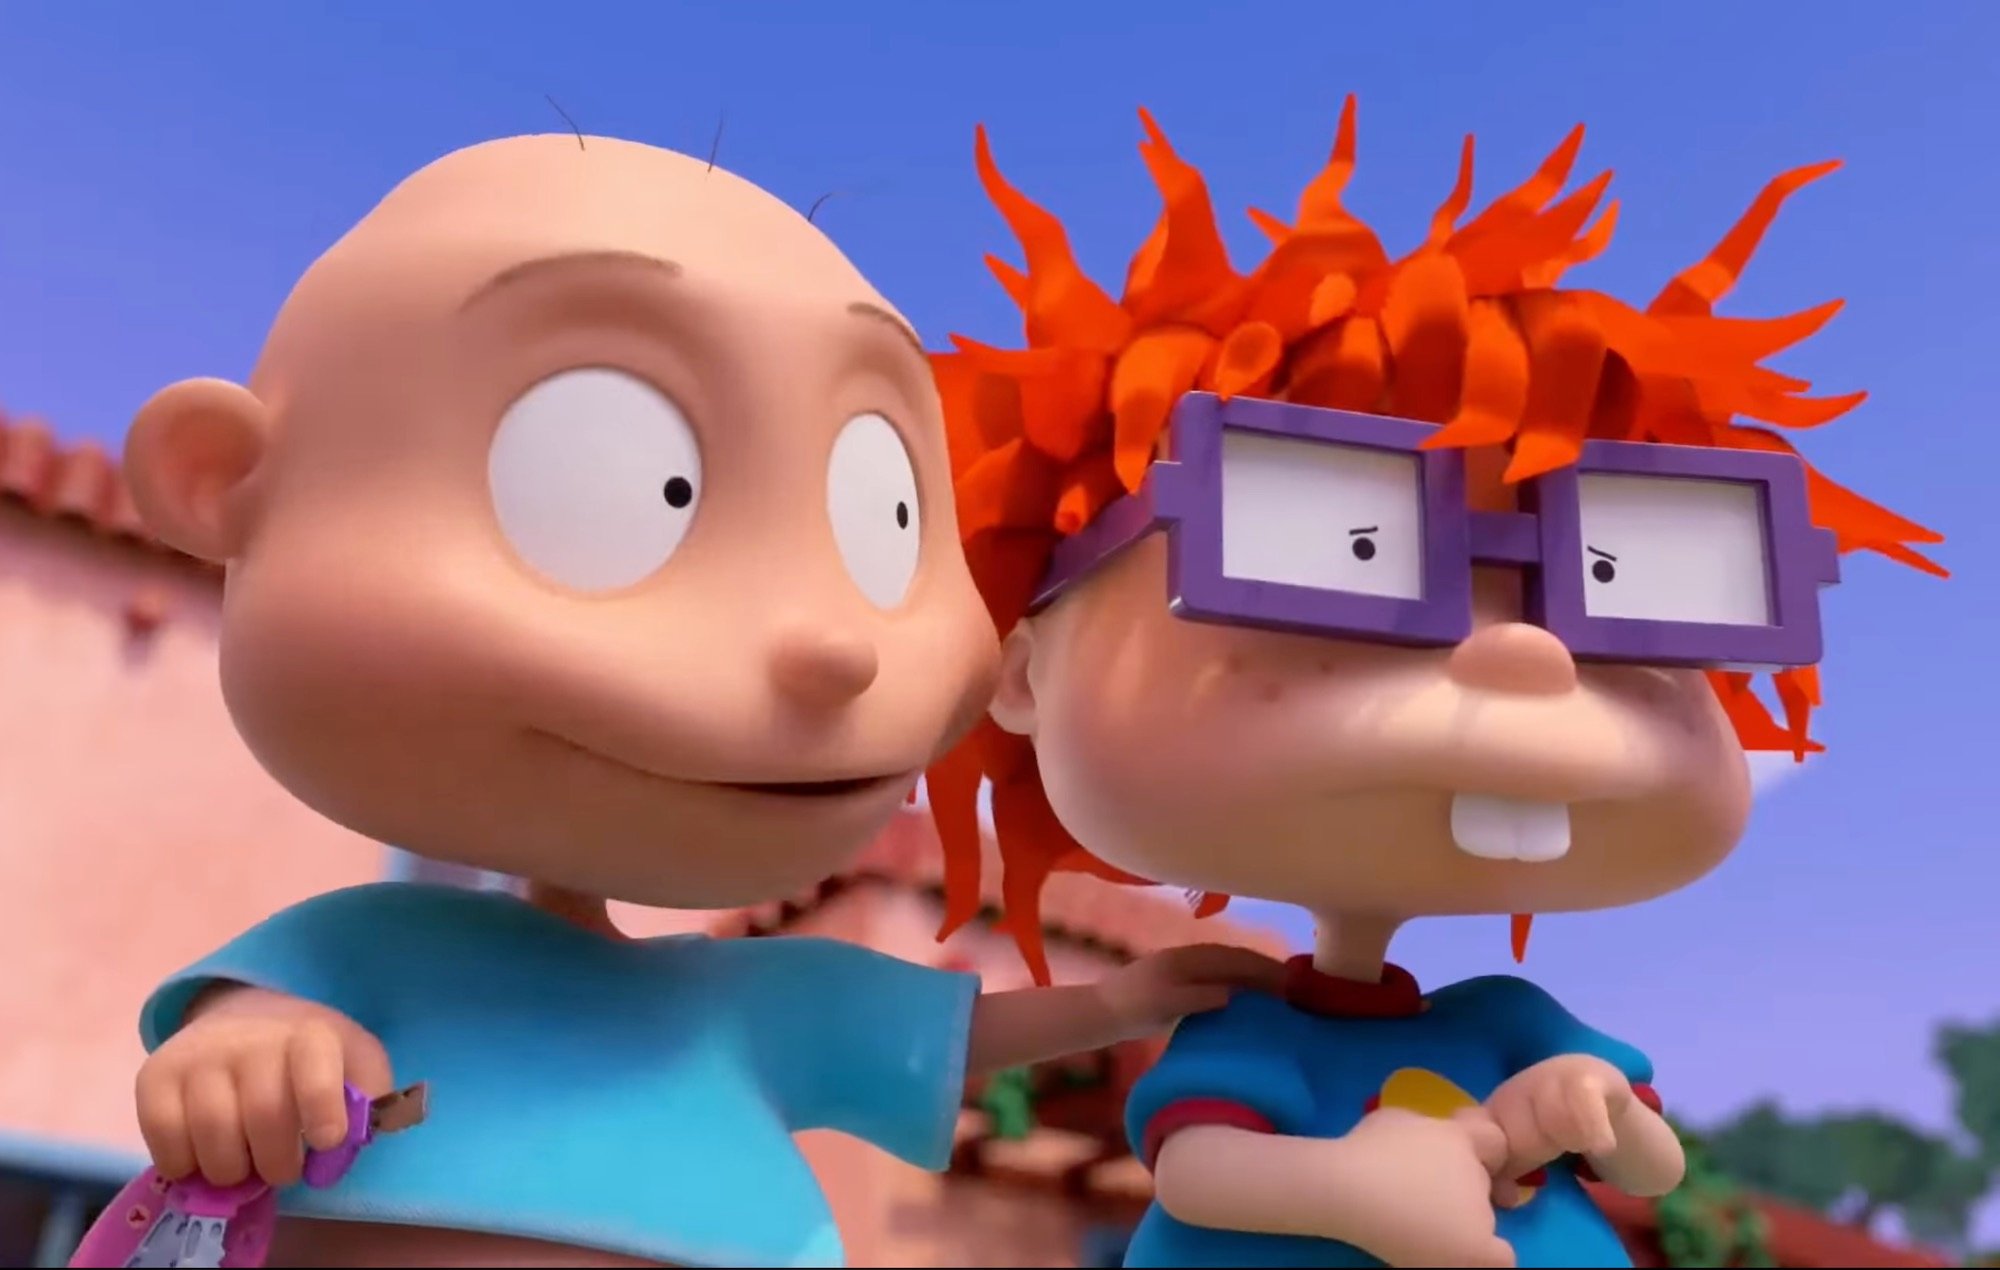 Tommy Pickles consoles a fearful looking Chuckie Finster in the Paramount+ reboot of 'Rugrats'